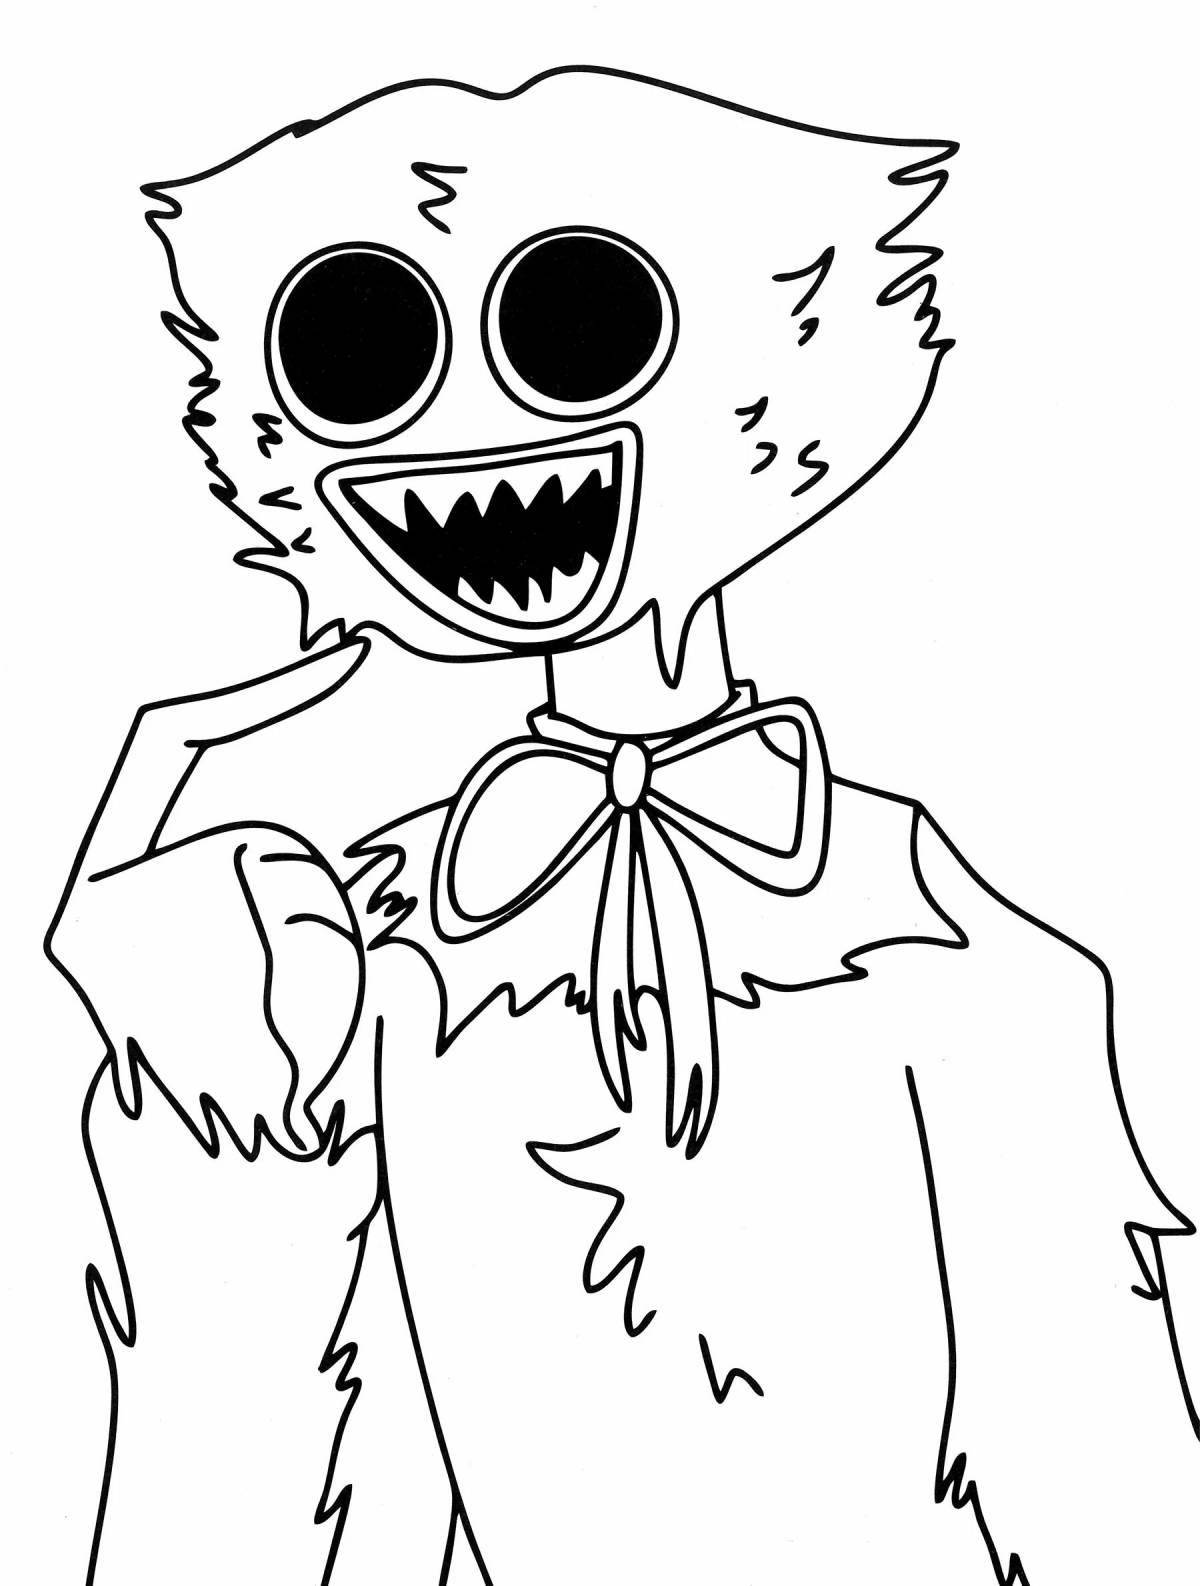 Awesome haggy waggie coloring page